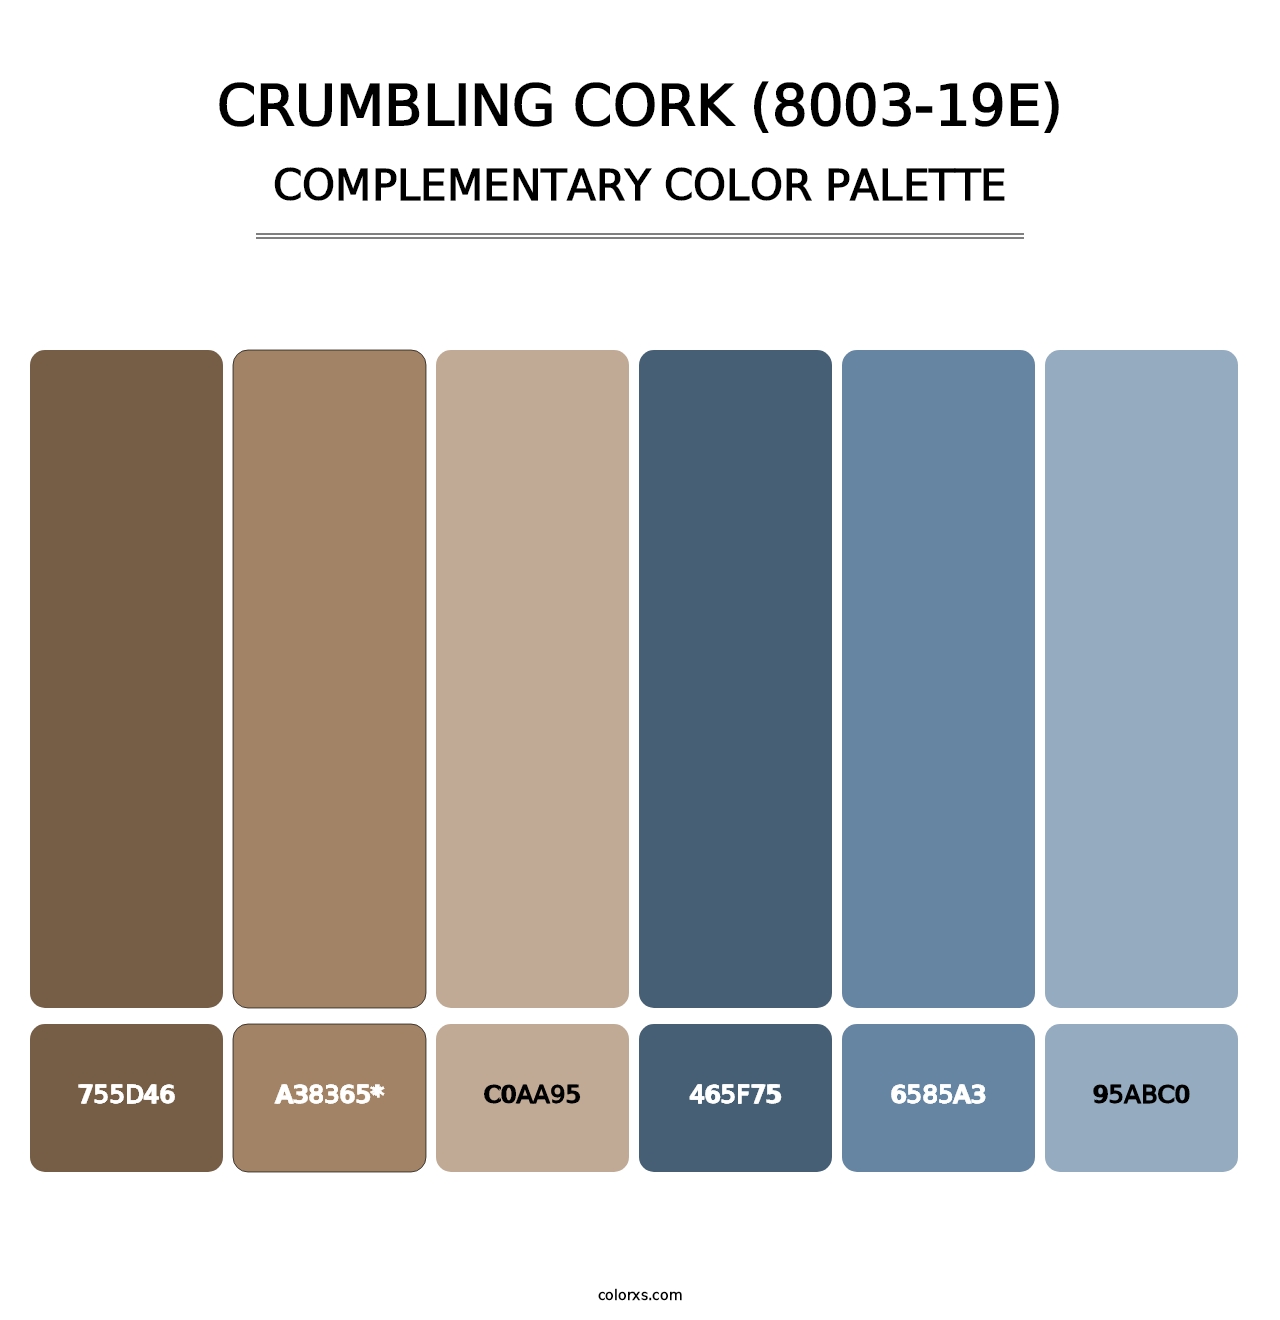 Crumbling Cork (8003-19E) - Complementary Color Palette